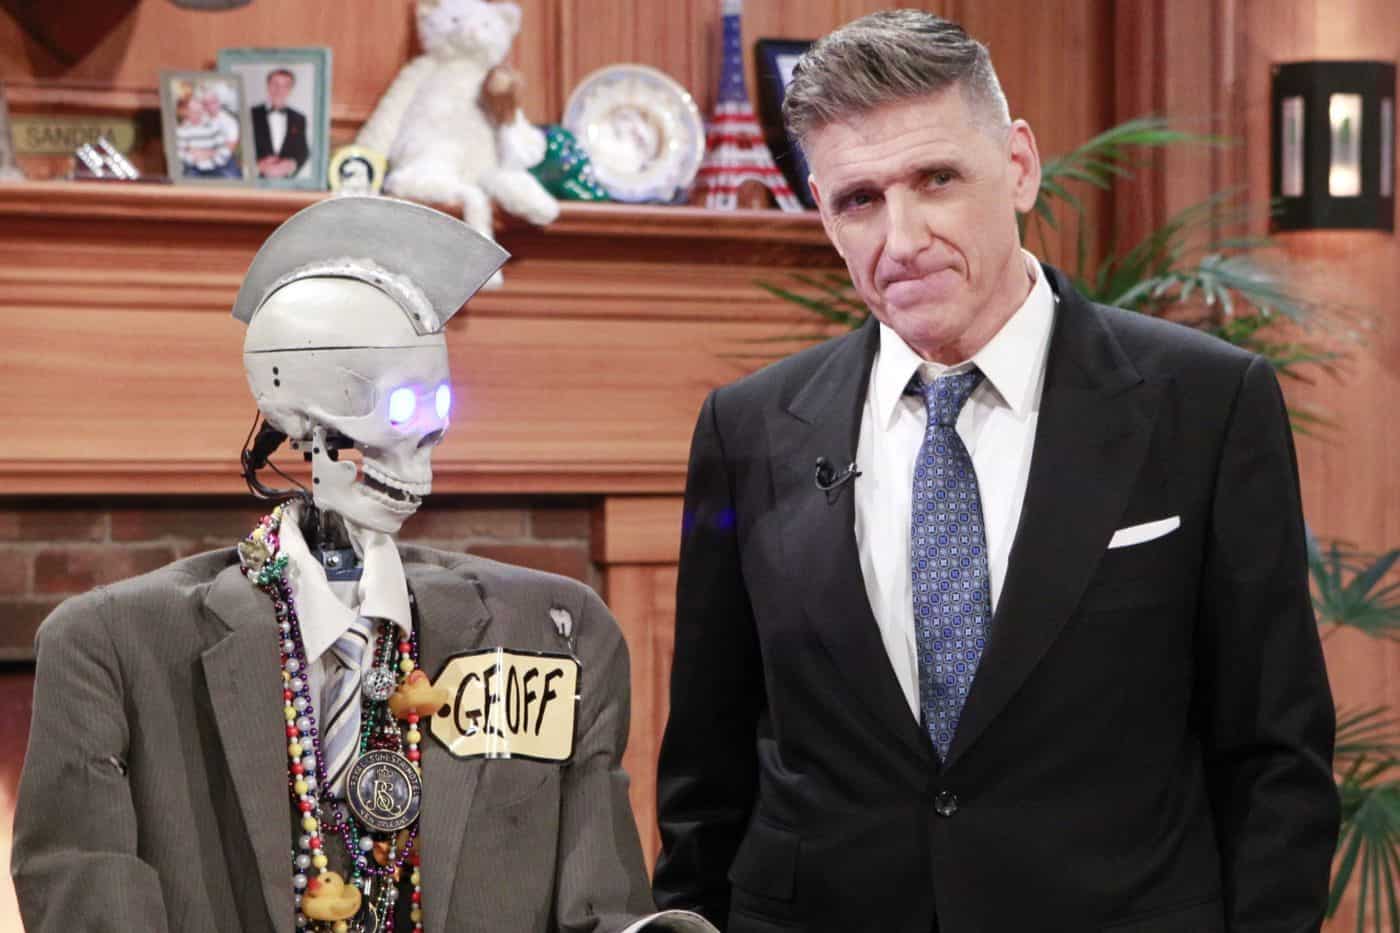 In December 2004, it was announced that Craig Ferguson would take over as the host of CBS's "The Late Late Show"